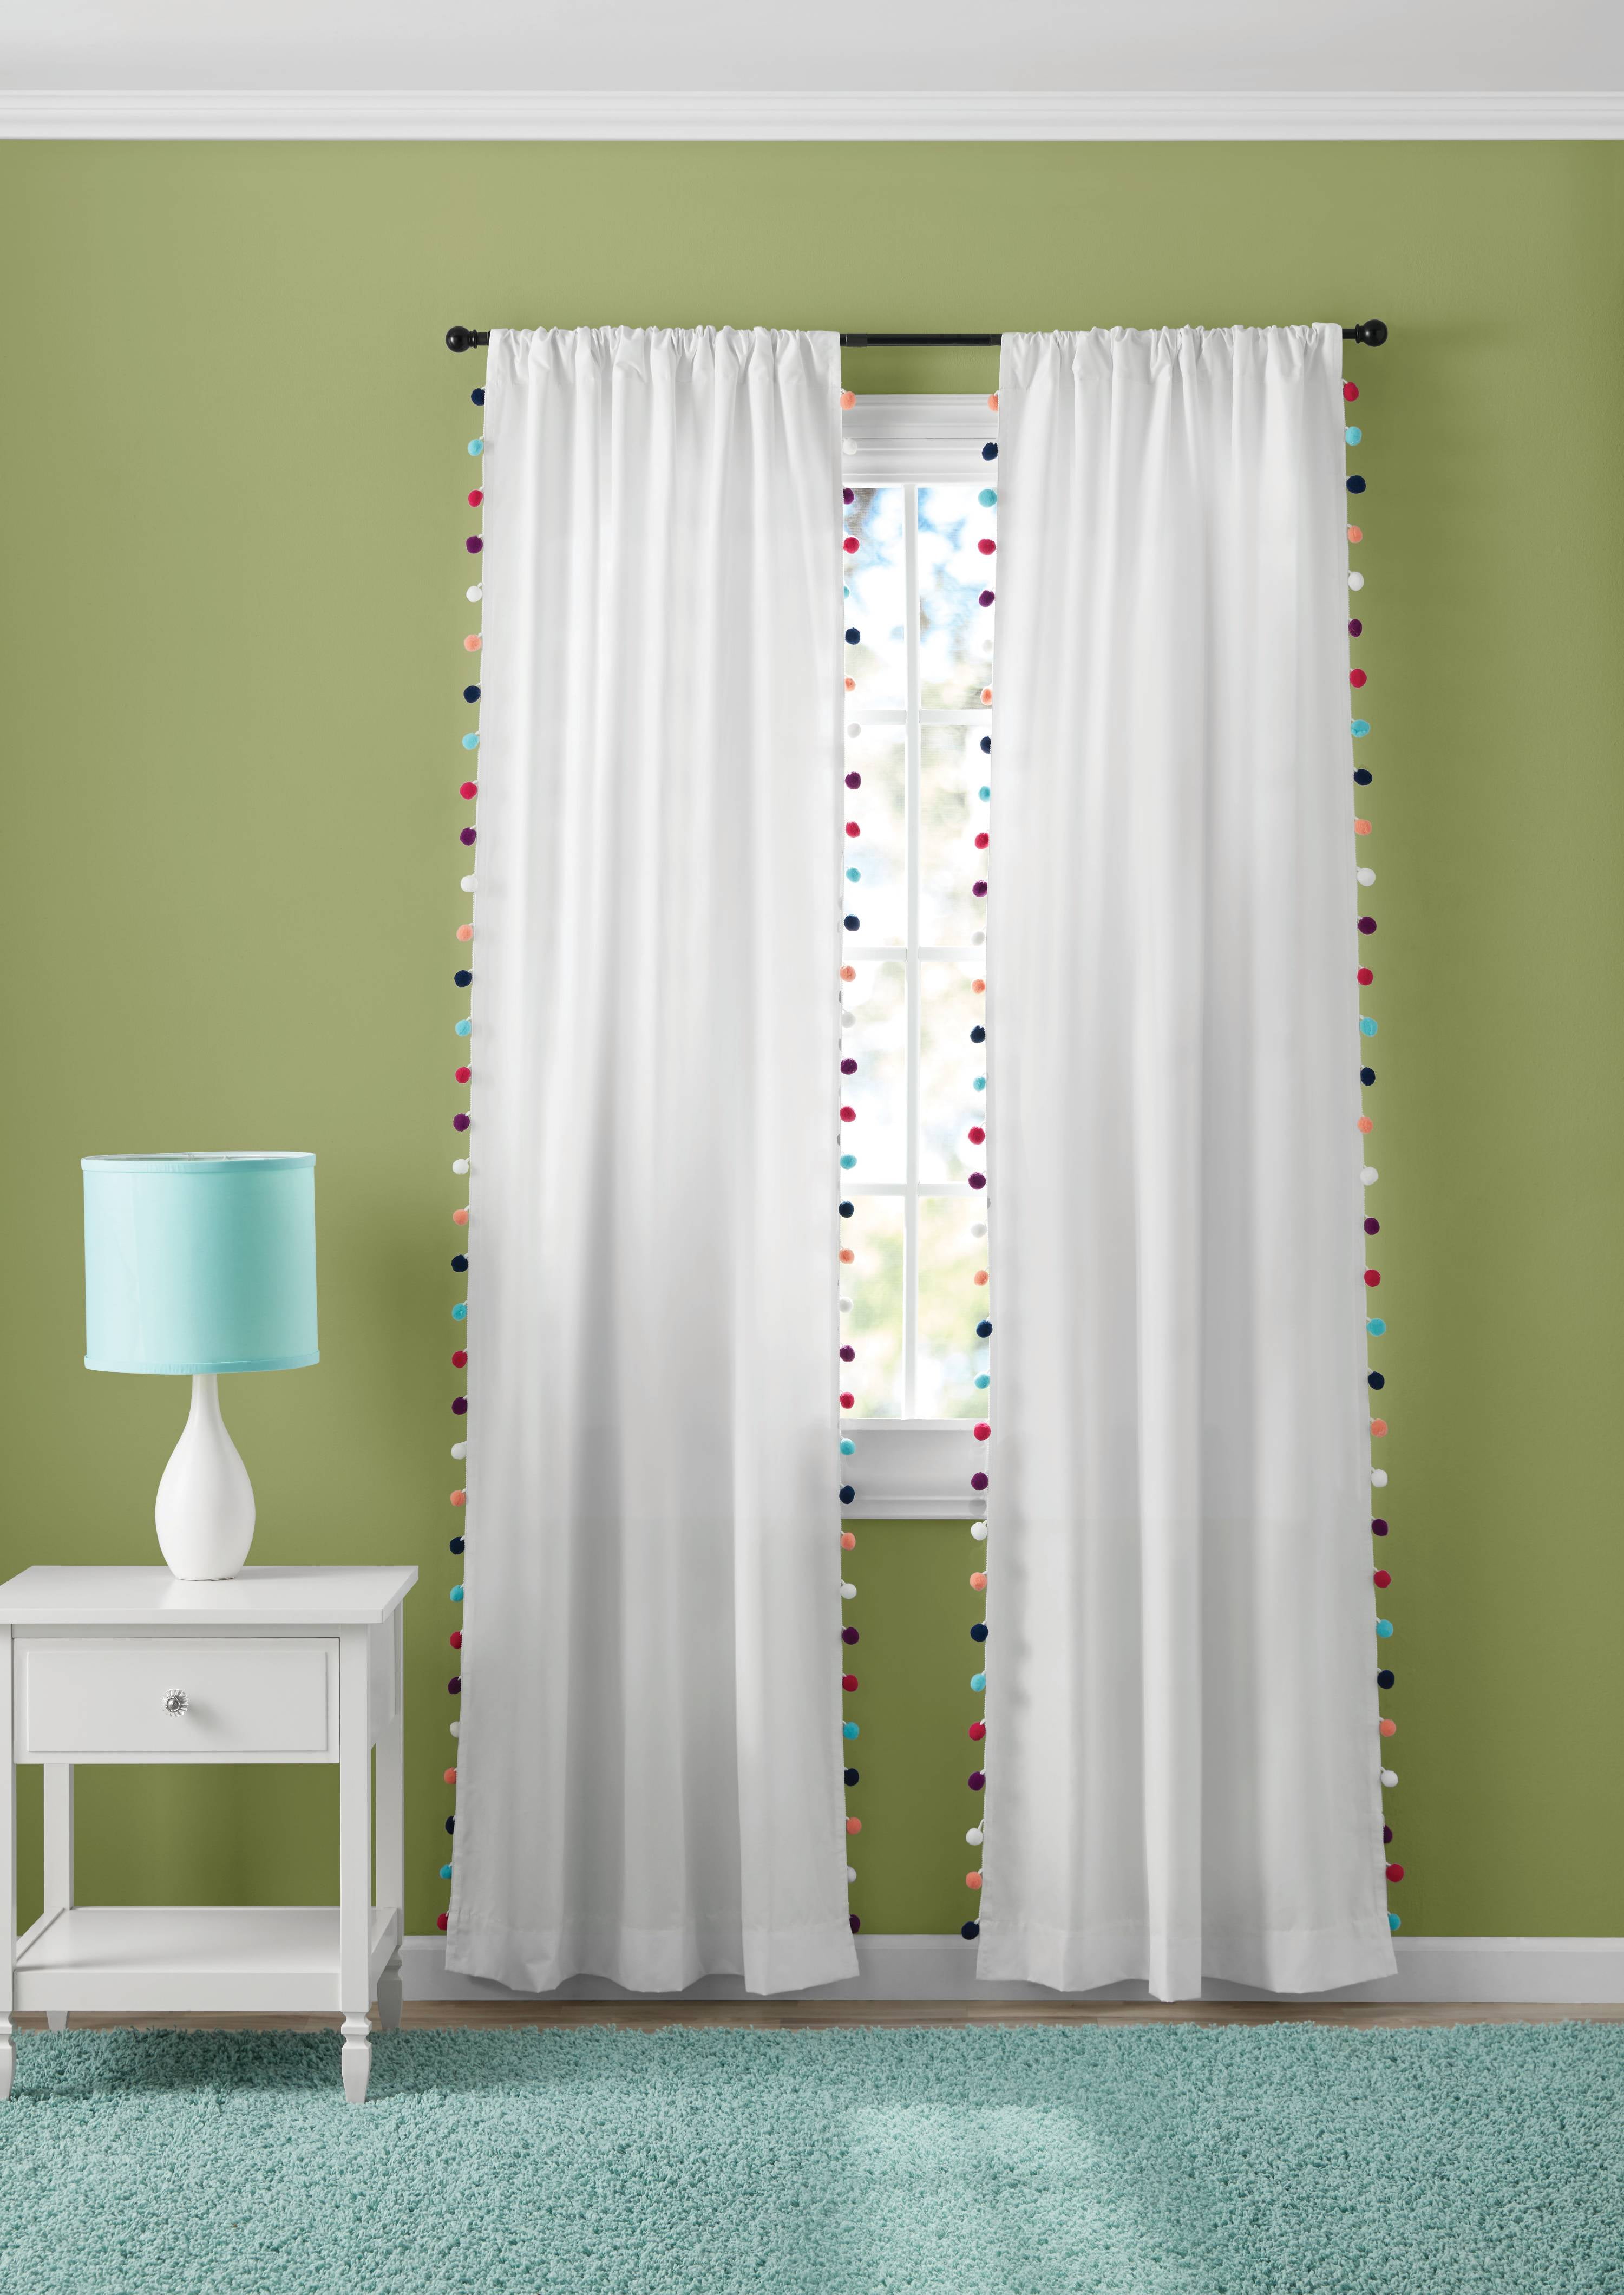 4 Pocket Pair of Colorful Pom Pom Sheer Chiffon White lace Window Curtains 40 W X 96H 